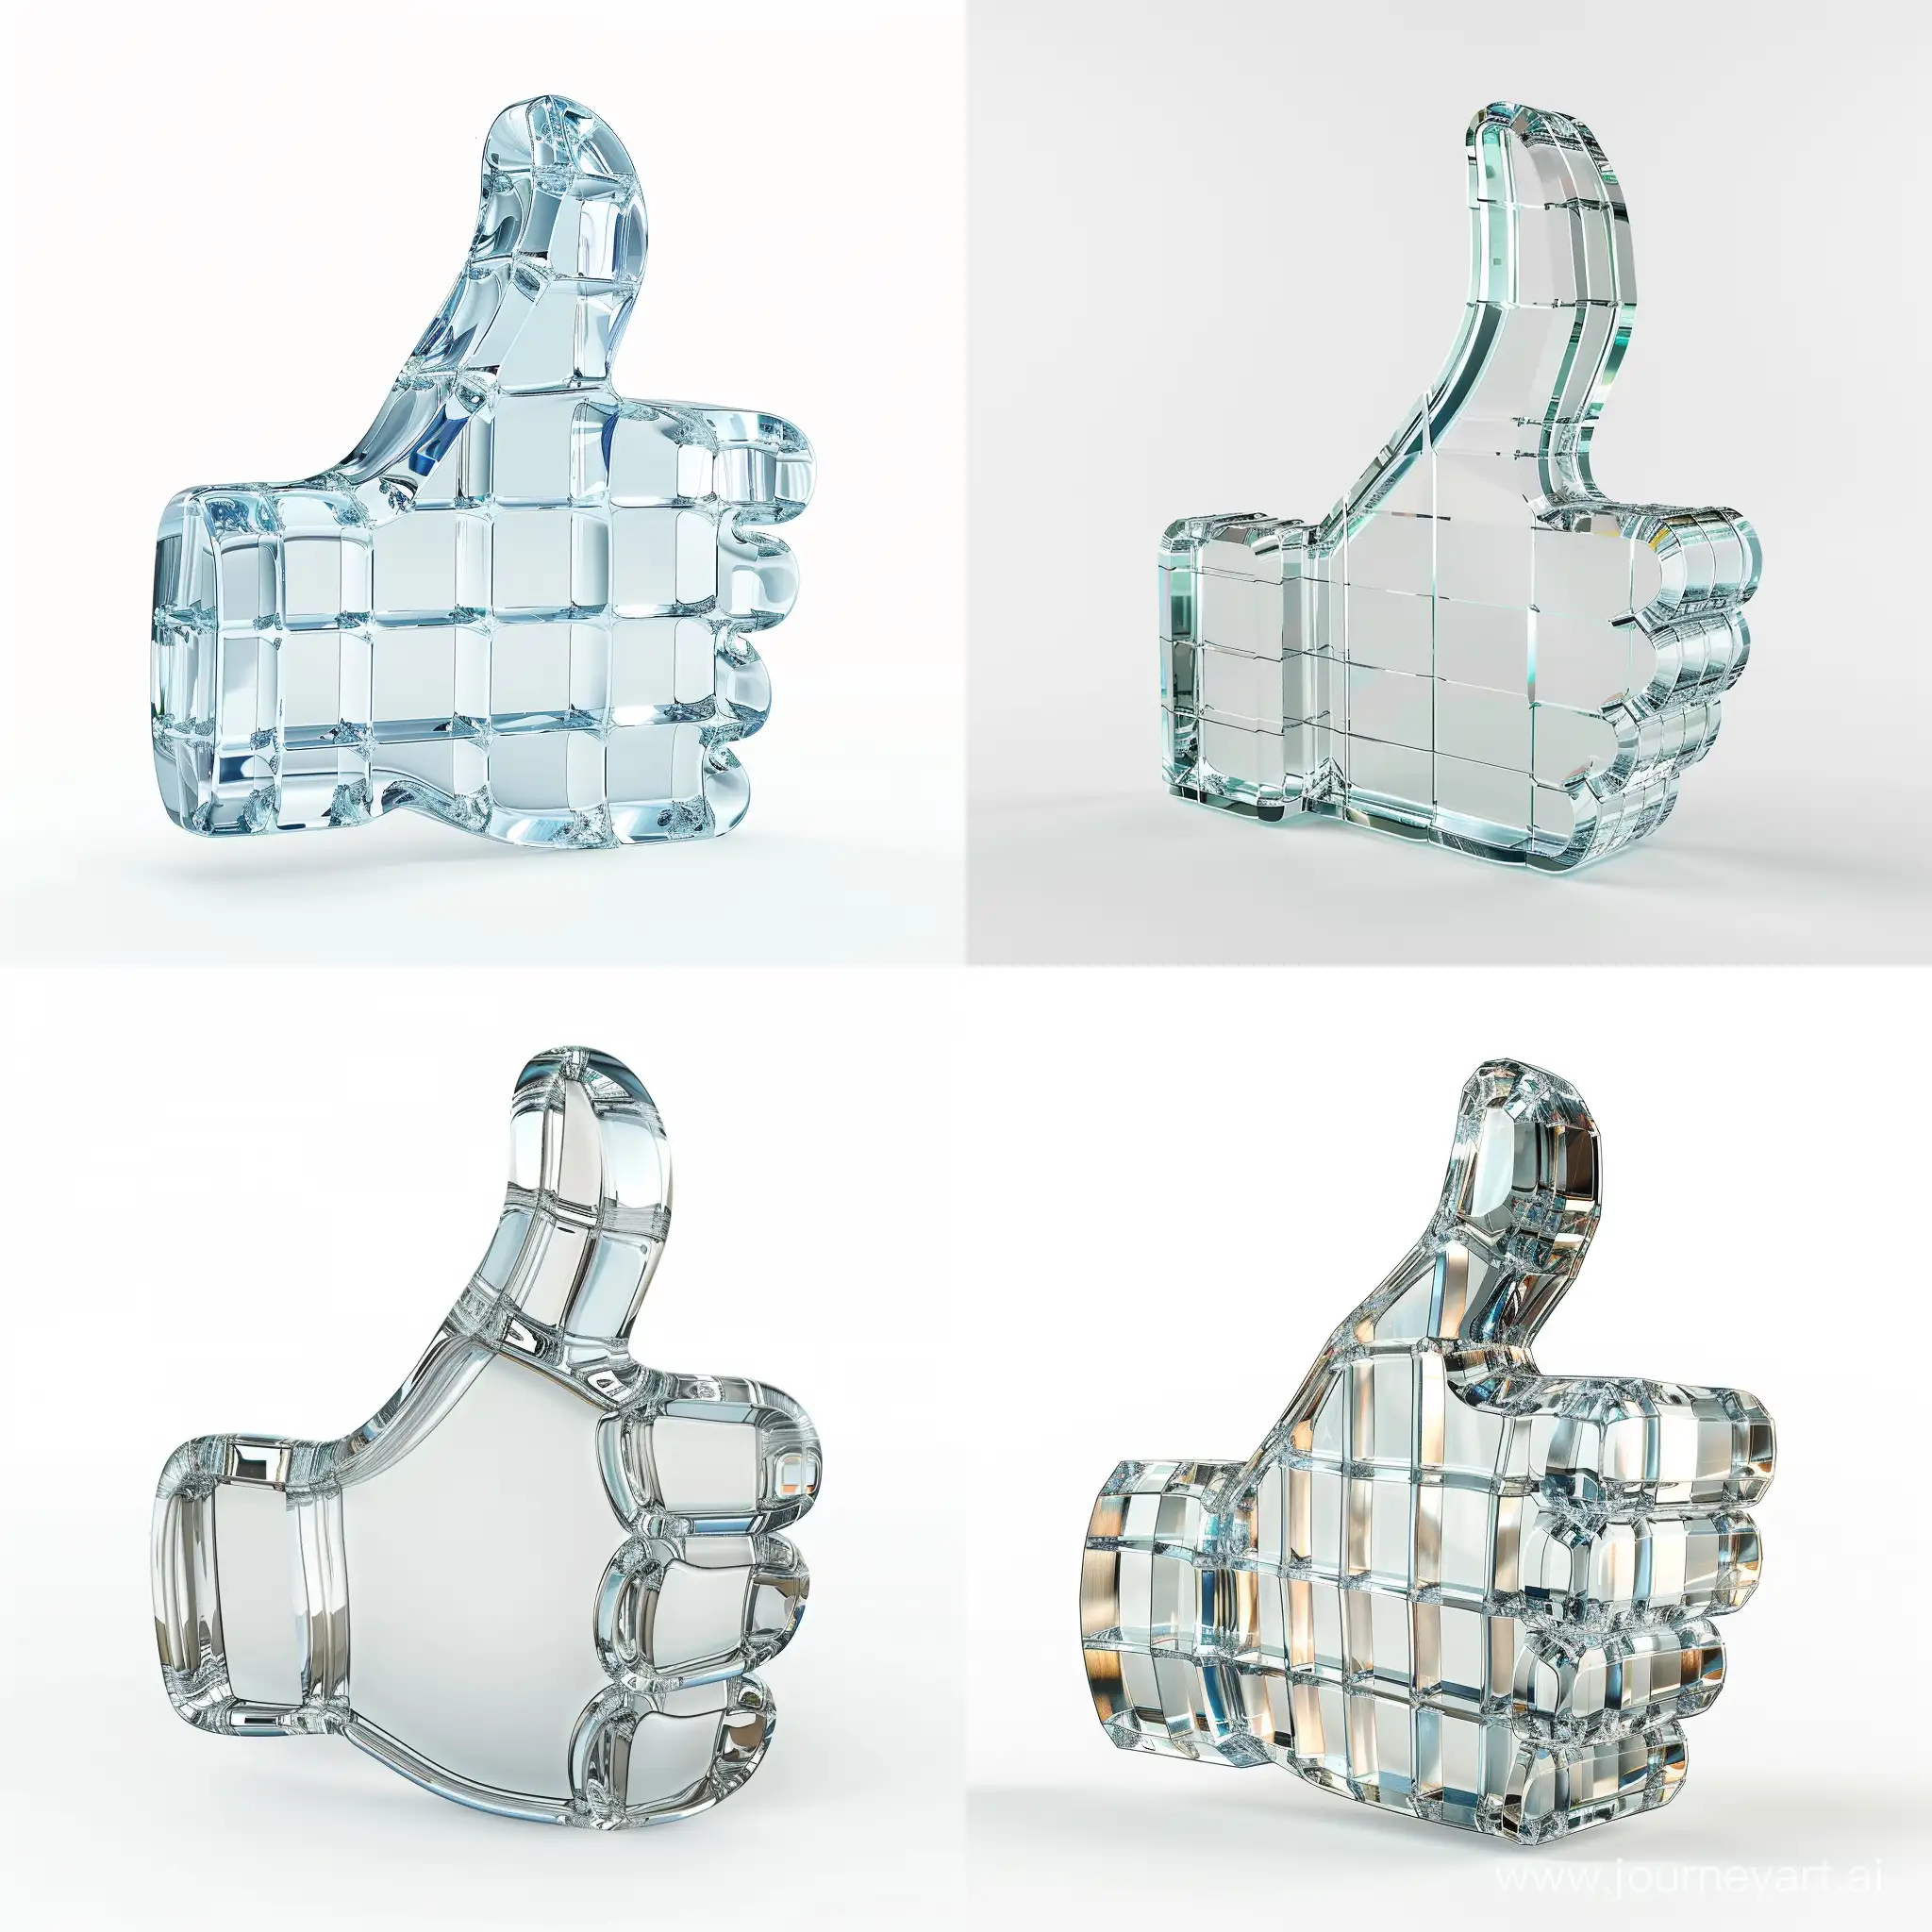 thumb down icon made of glass 3d render on white background